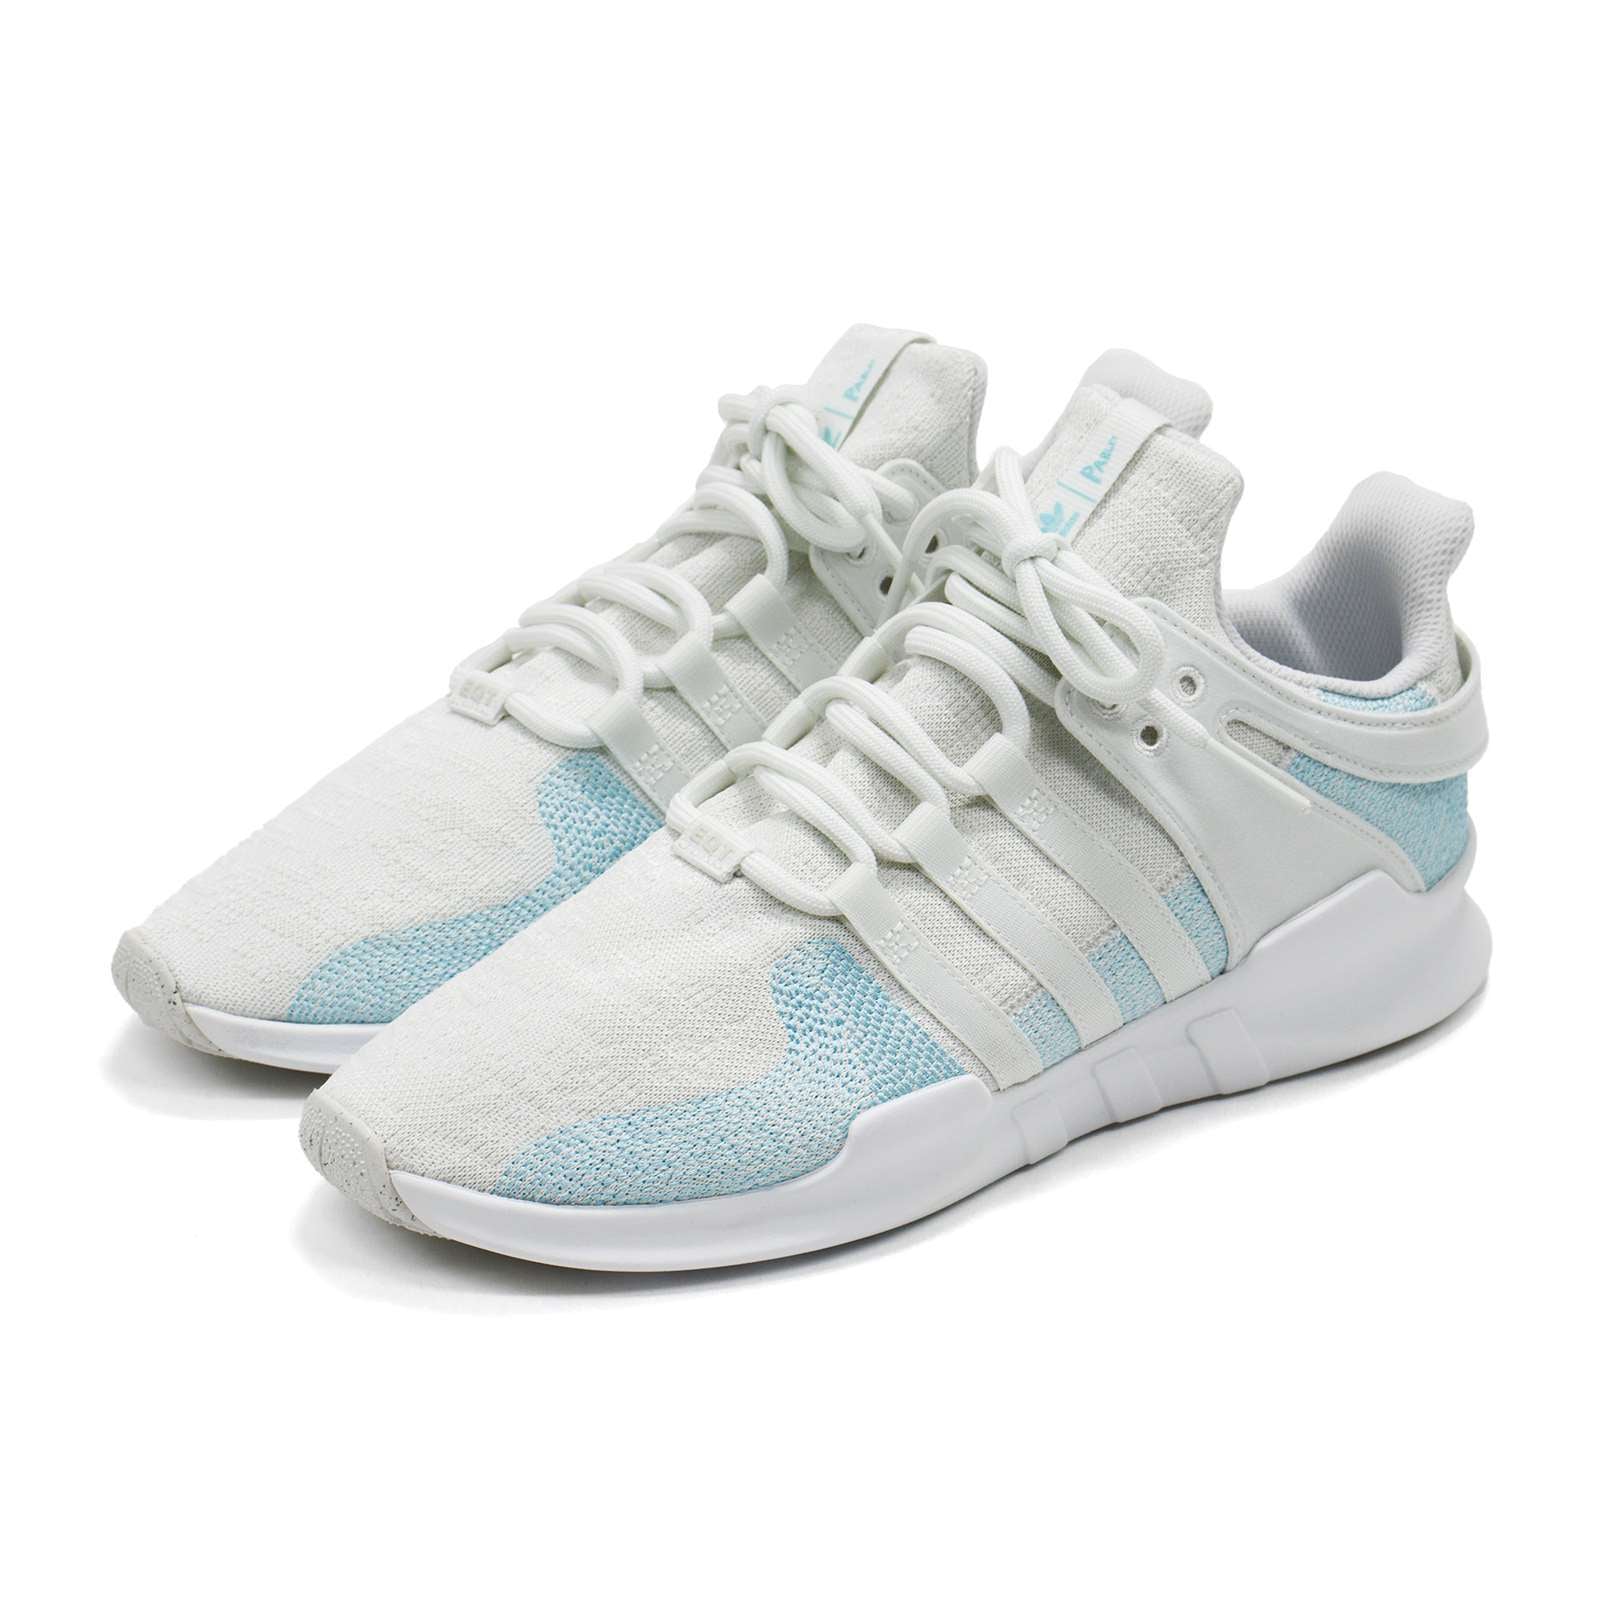 Adidas Men Eqt Support Adv Ck Parley Running Shoes